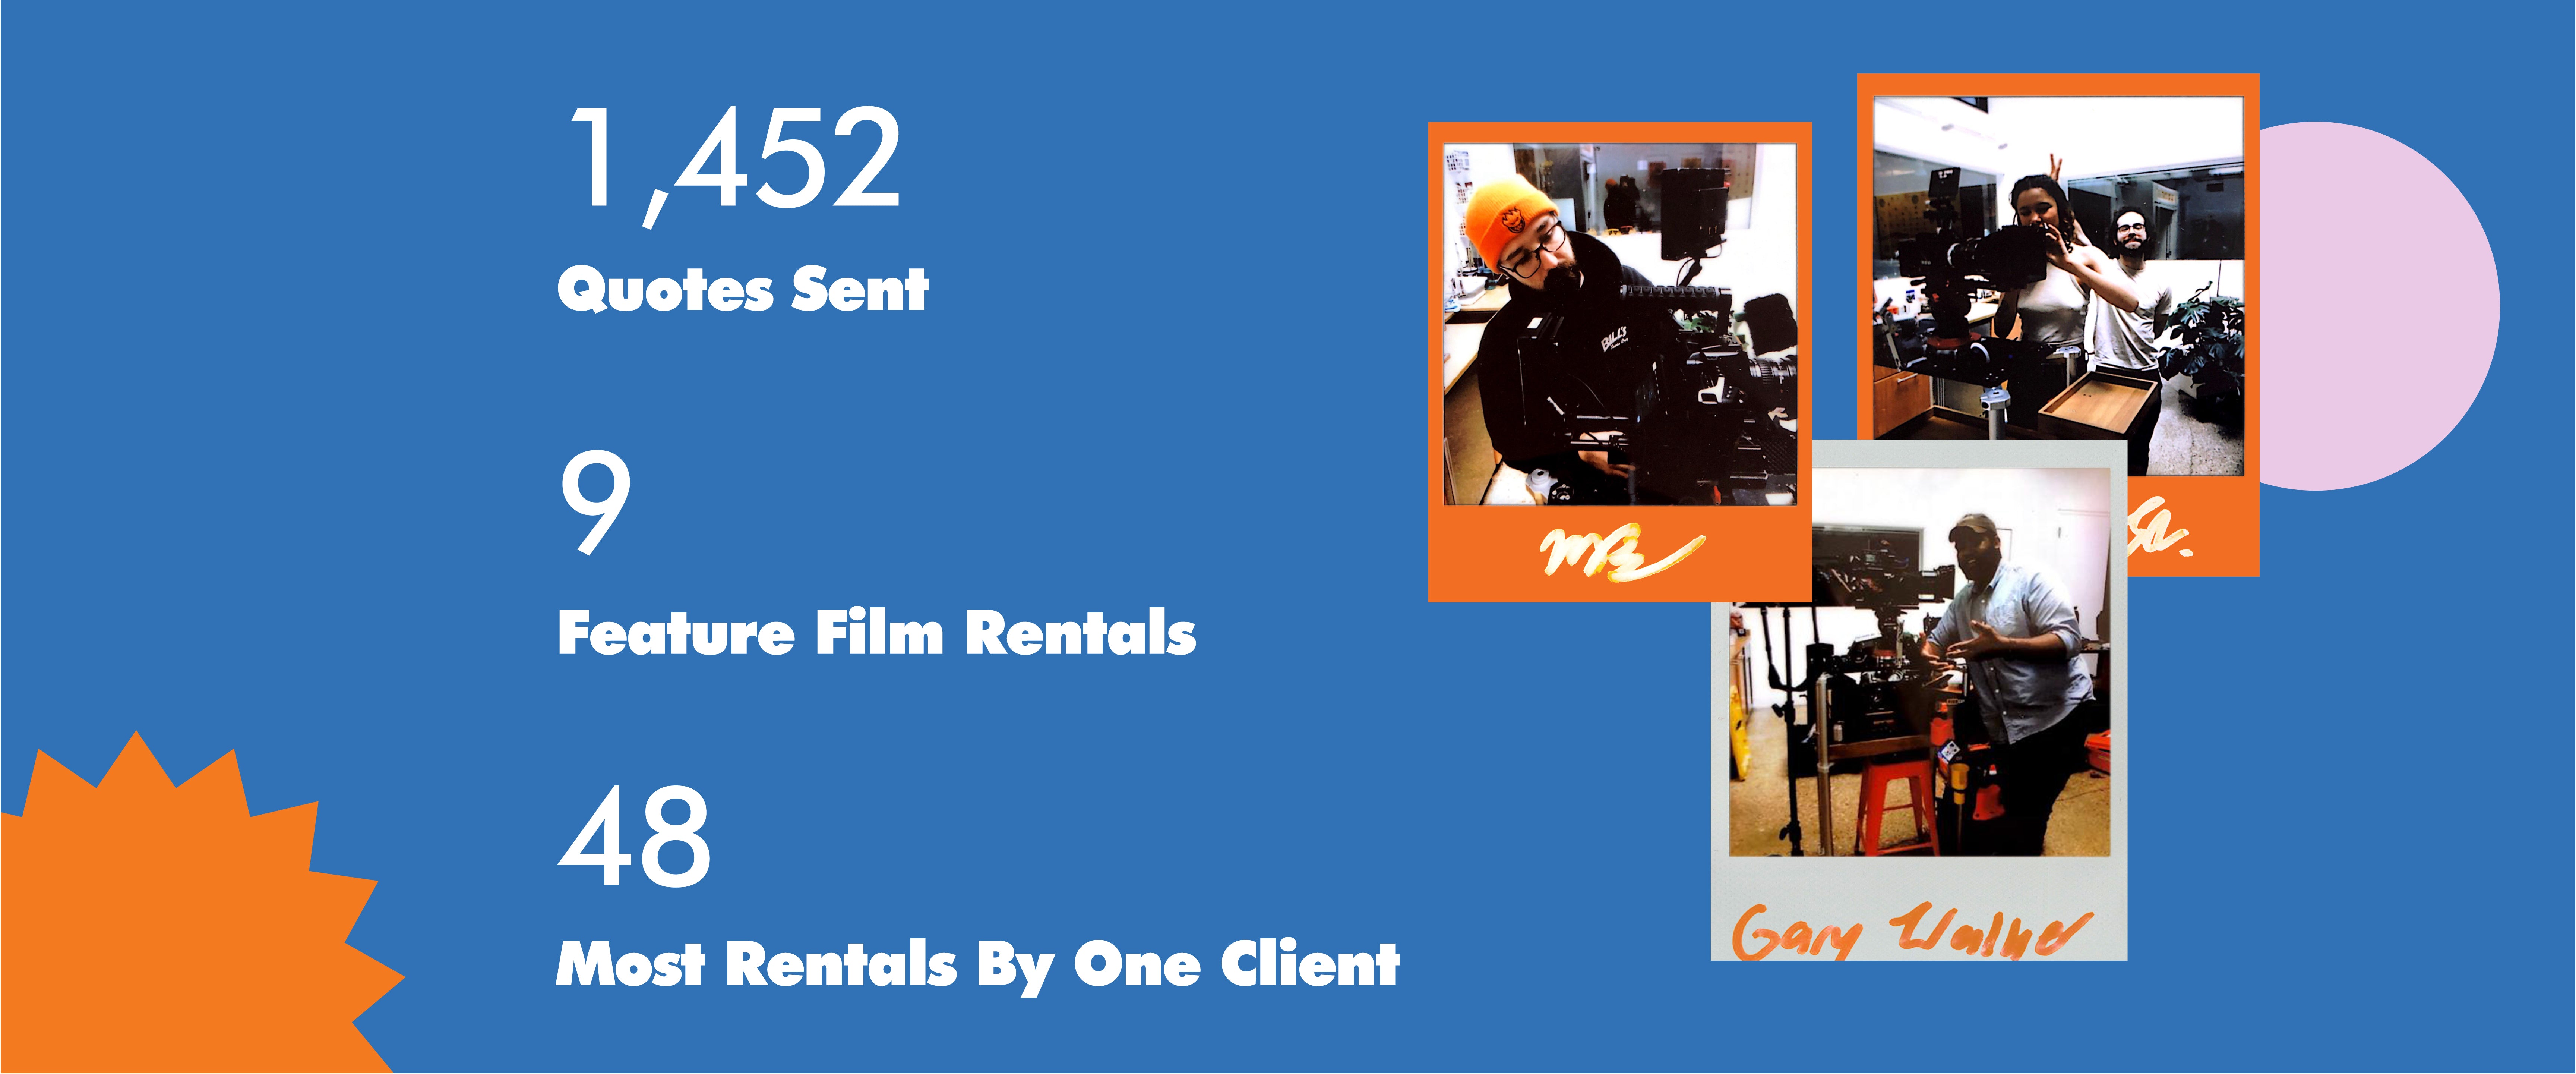 Stats for the 2022 Camera Ambassador Wrapped series: 1452 Quotes Sent, 9 Feature Film Rentals, and 48 Most Rentals by One Client. The images are of Polaroids of our clients' prep throughout the year